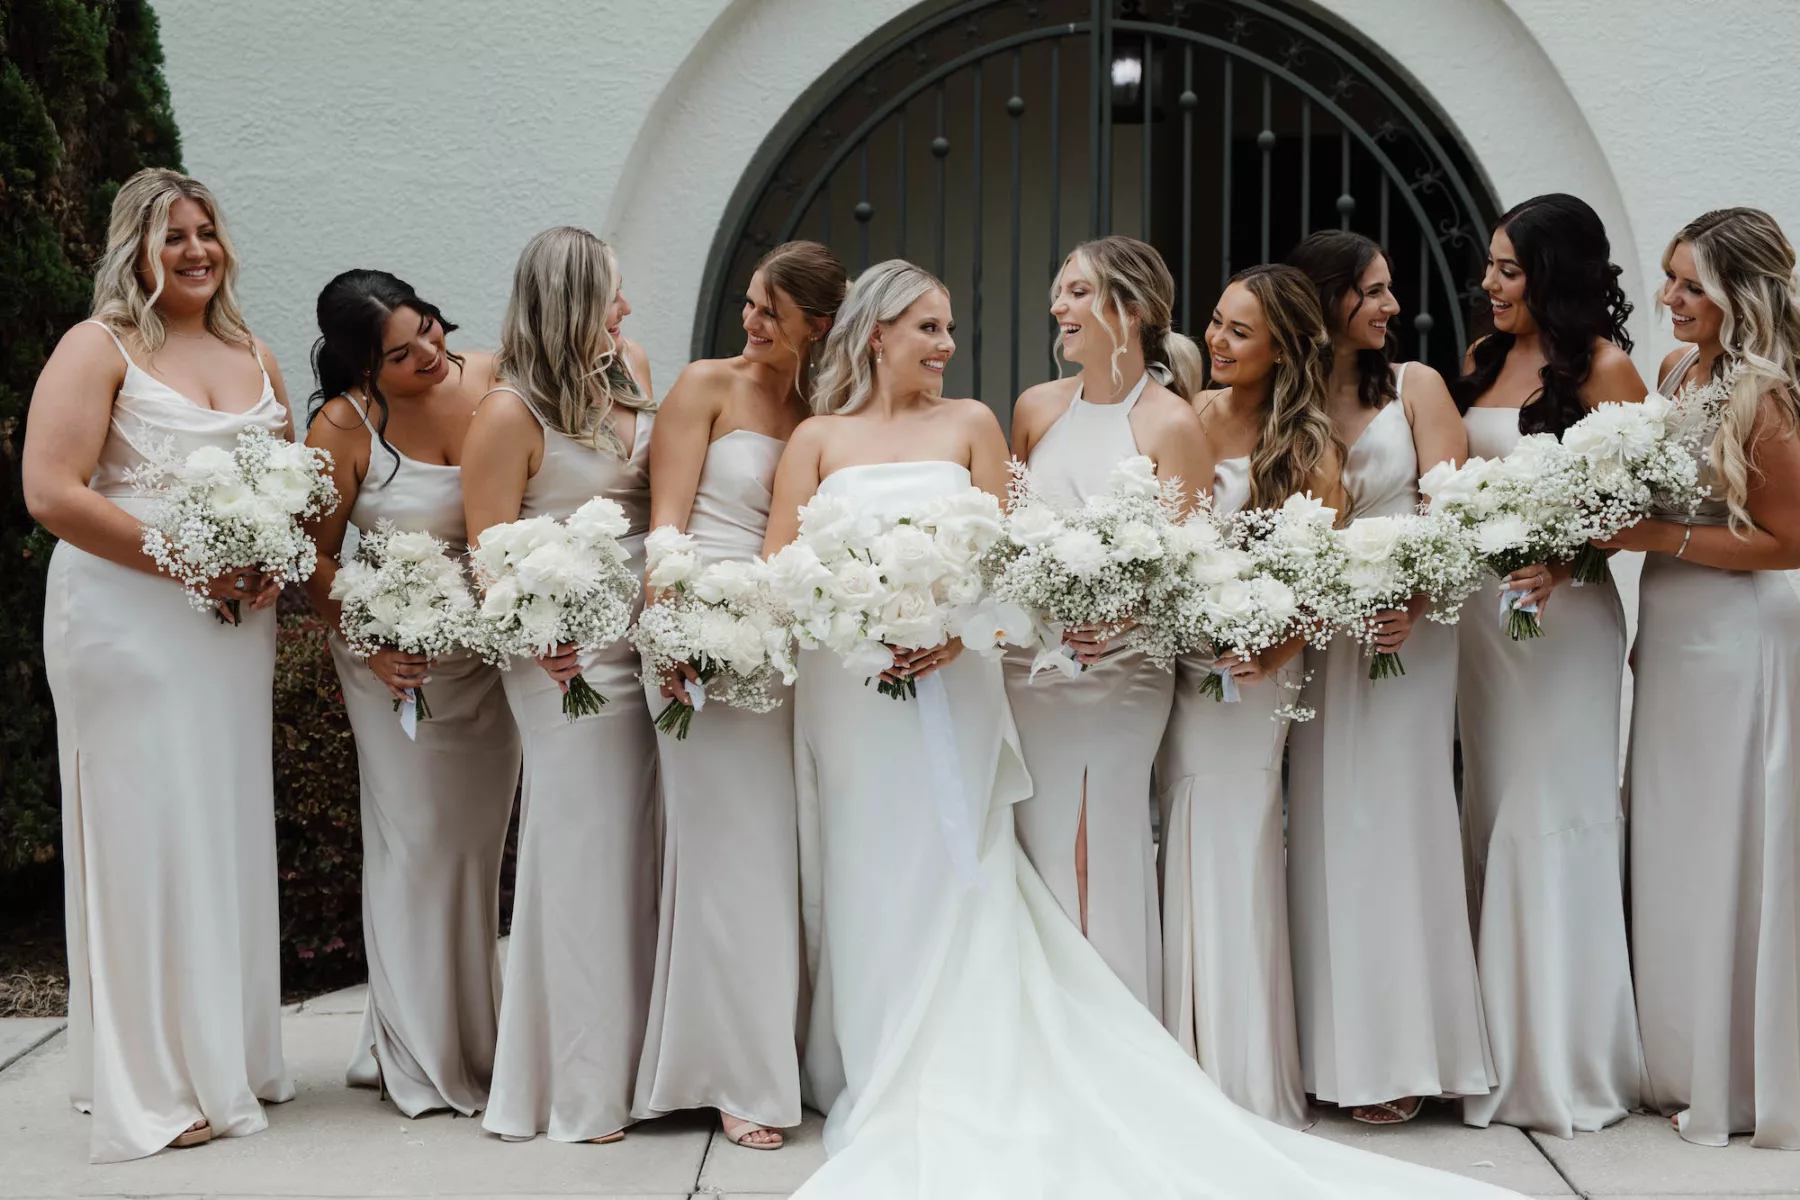 Mismatched Neutral Champagne Satin Bridesmaids Dresses Inspiration | White Roses and Baby's Breath Wedding Day Bouquet Ideas